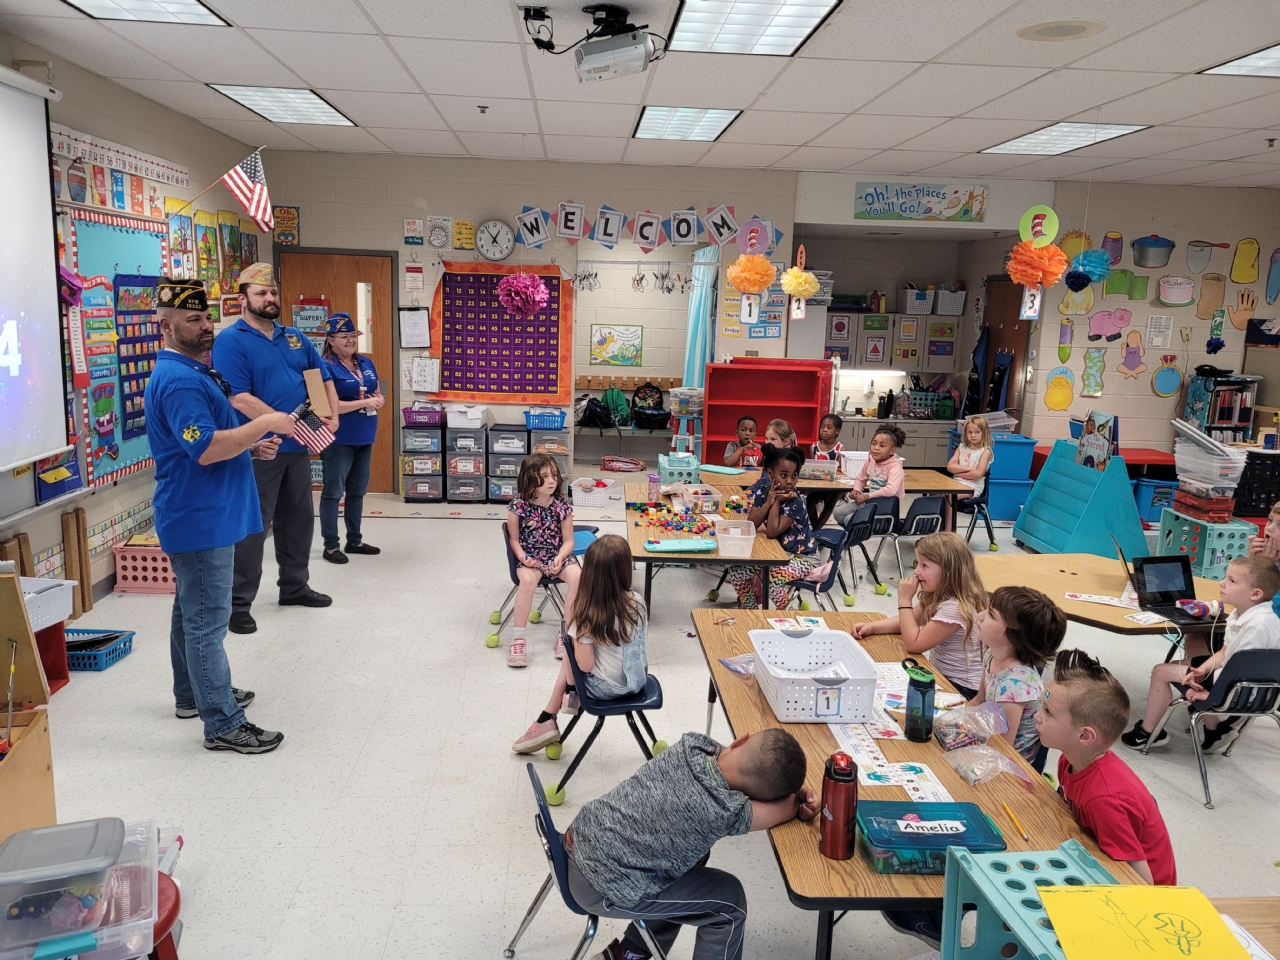 We had the opportunity to visit with the King George Elementary School Kindergarten Class and help them with their ABC Countdown. 19MAY2022 was U for United States Day and we handed out small American flags and patriotic coloring books to every student.

Thank you to Mrs. Boyd for inviting us, we had a fantastic time talking with all of the students!